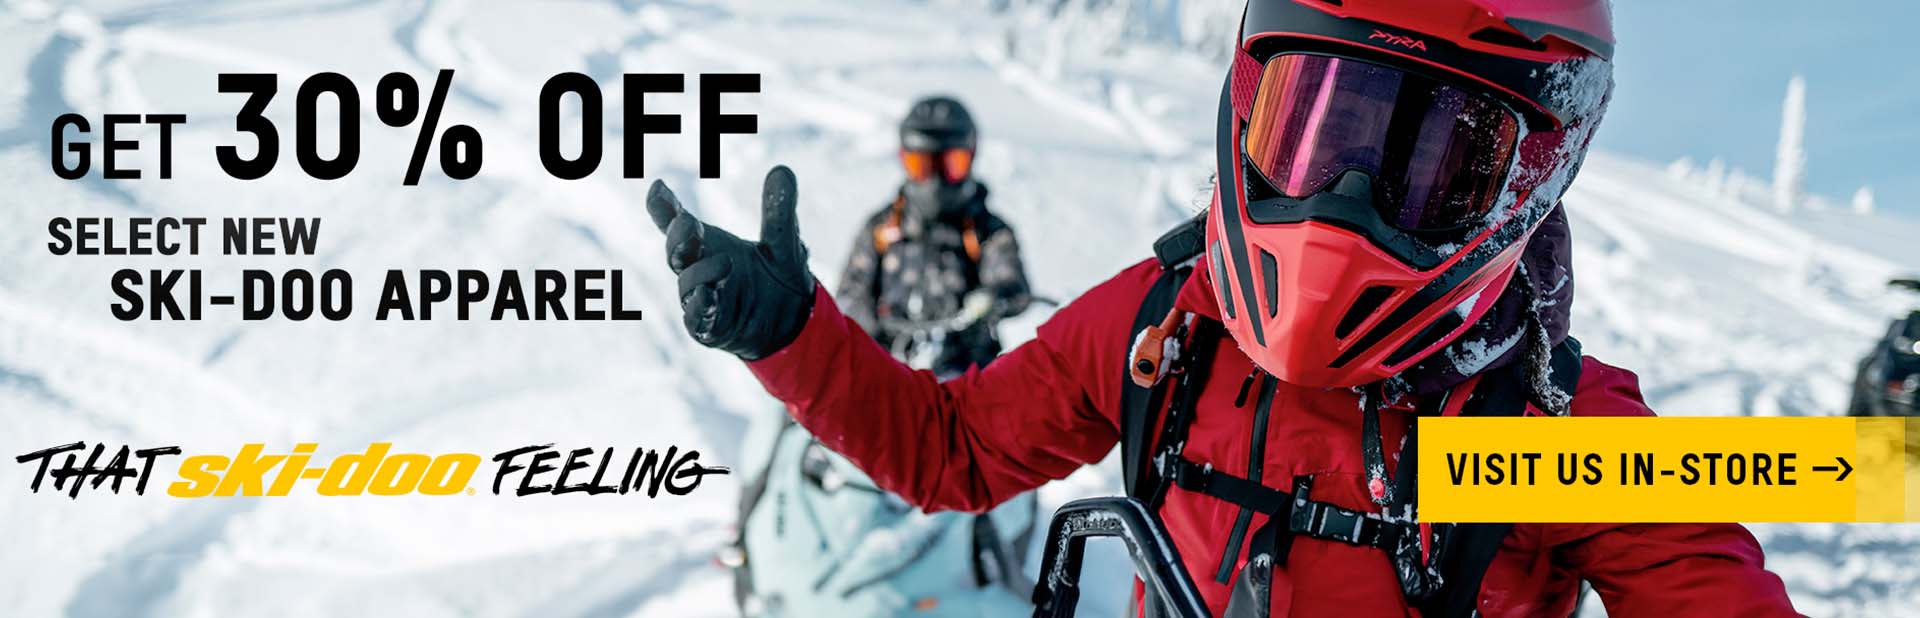 Get 30% off select Ski-Doo and/or Lynx Apparel purchase